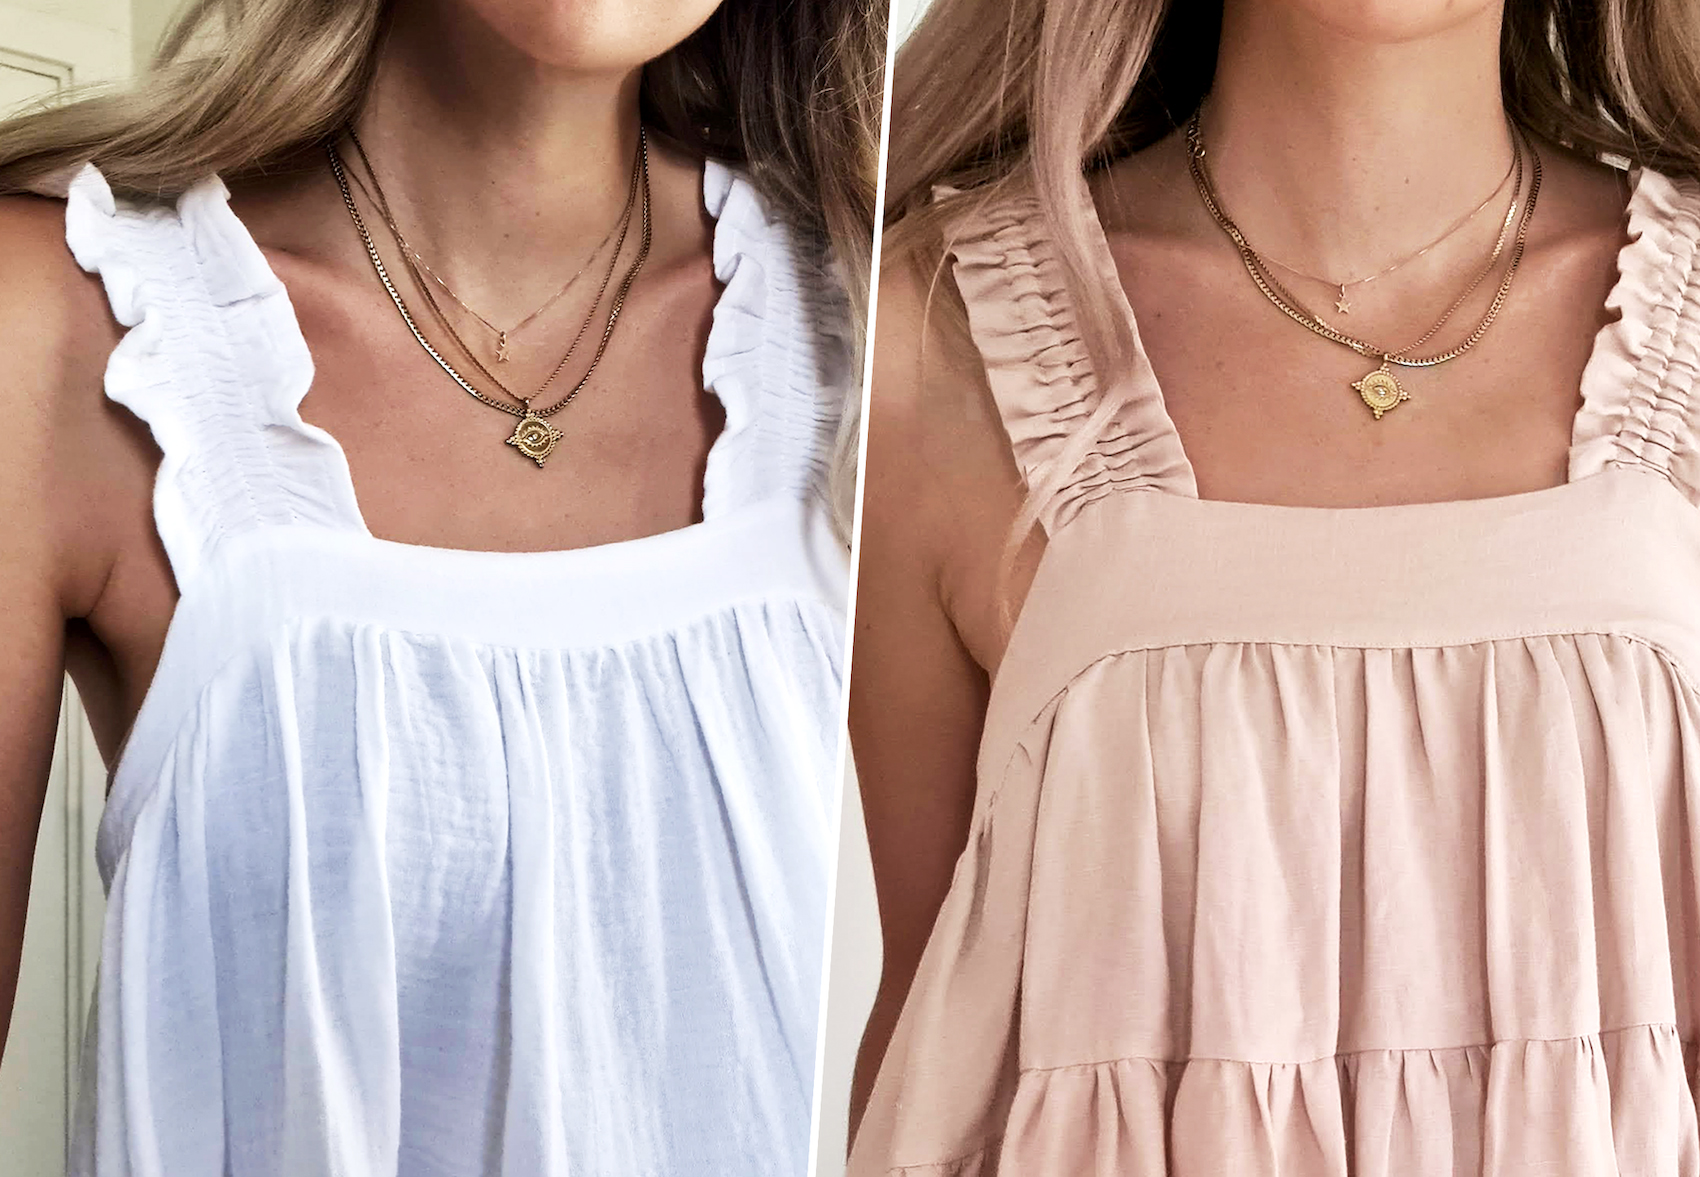 How To: Frilly Shoulder Straps 2 Ways - Using Shirring and Cased